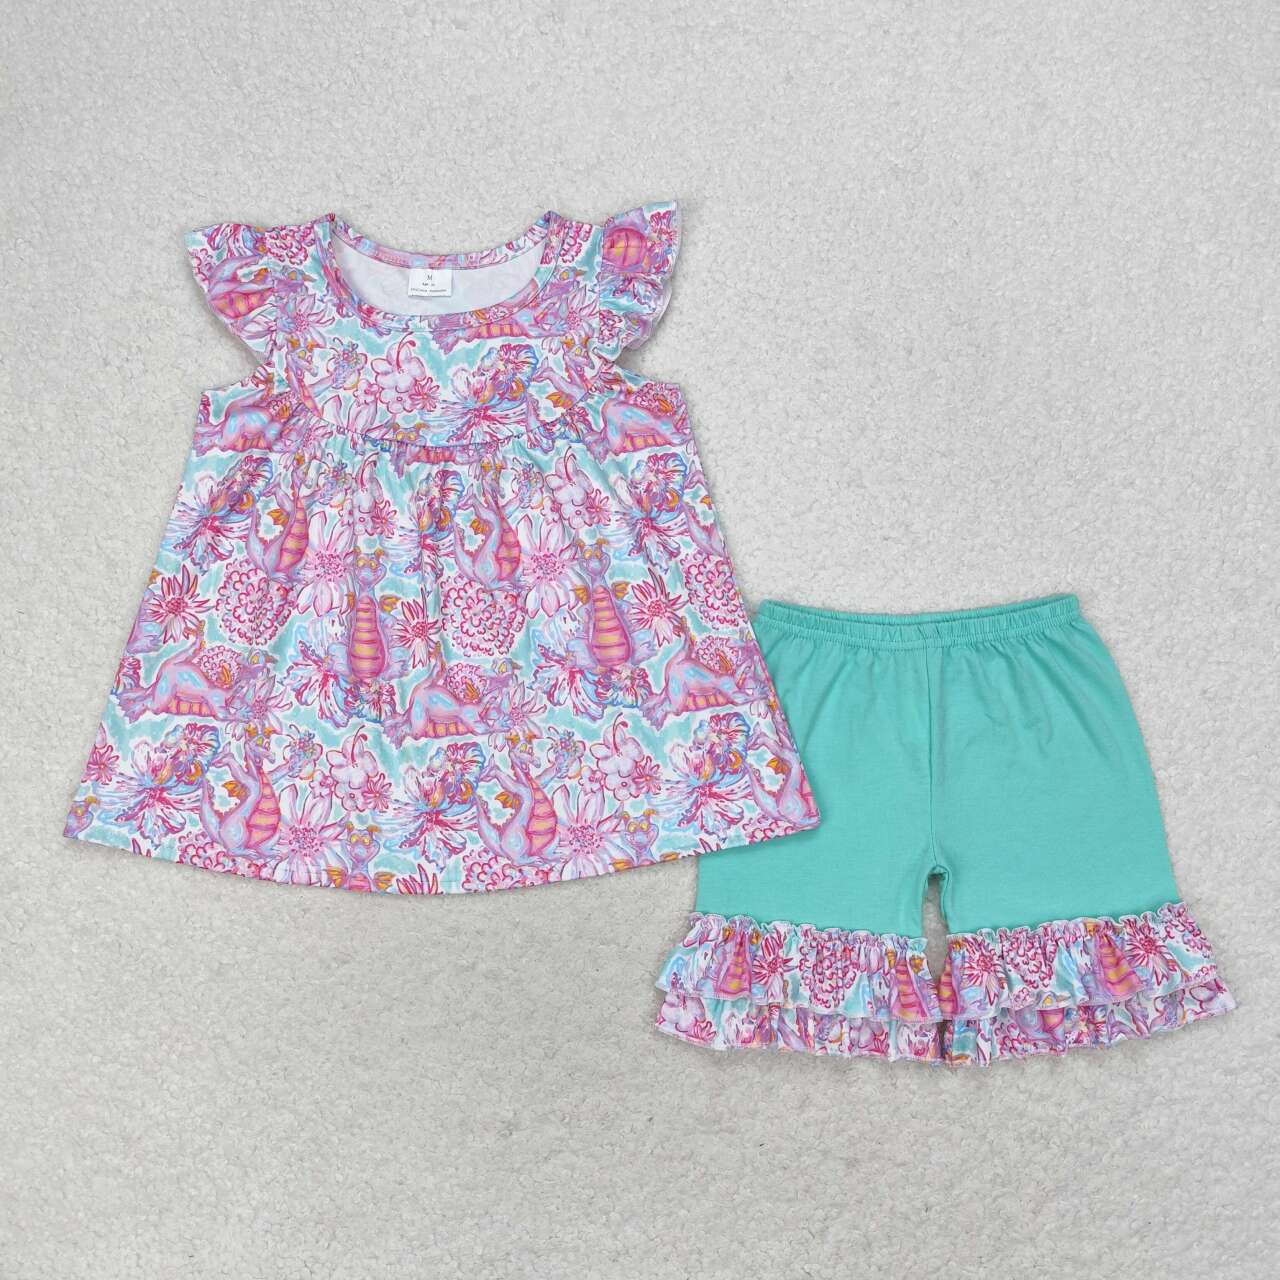 GSSO1356 Colorful Flowers Tunic Top Ruffle Shorts Girls Summer Clothes Set